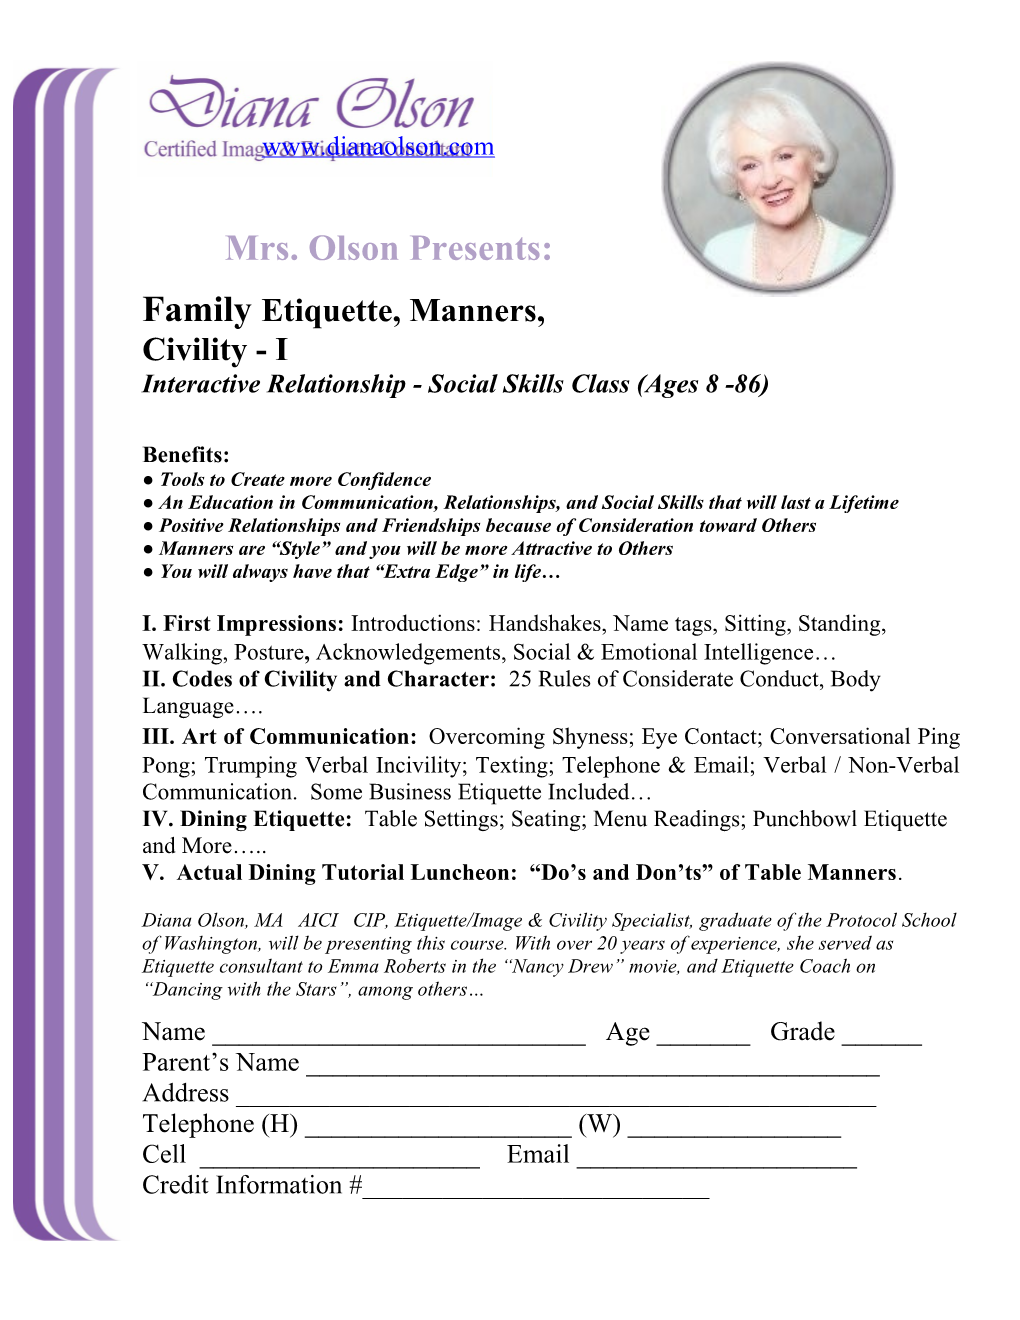 Family Etiquette, Manners, Civility - I